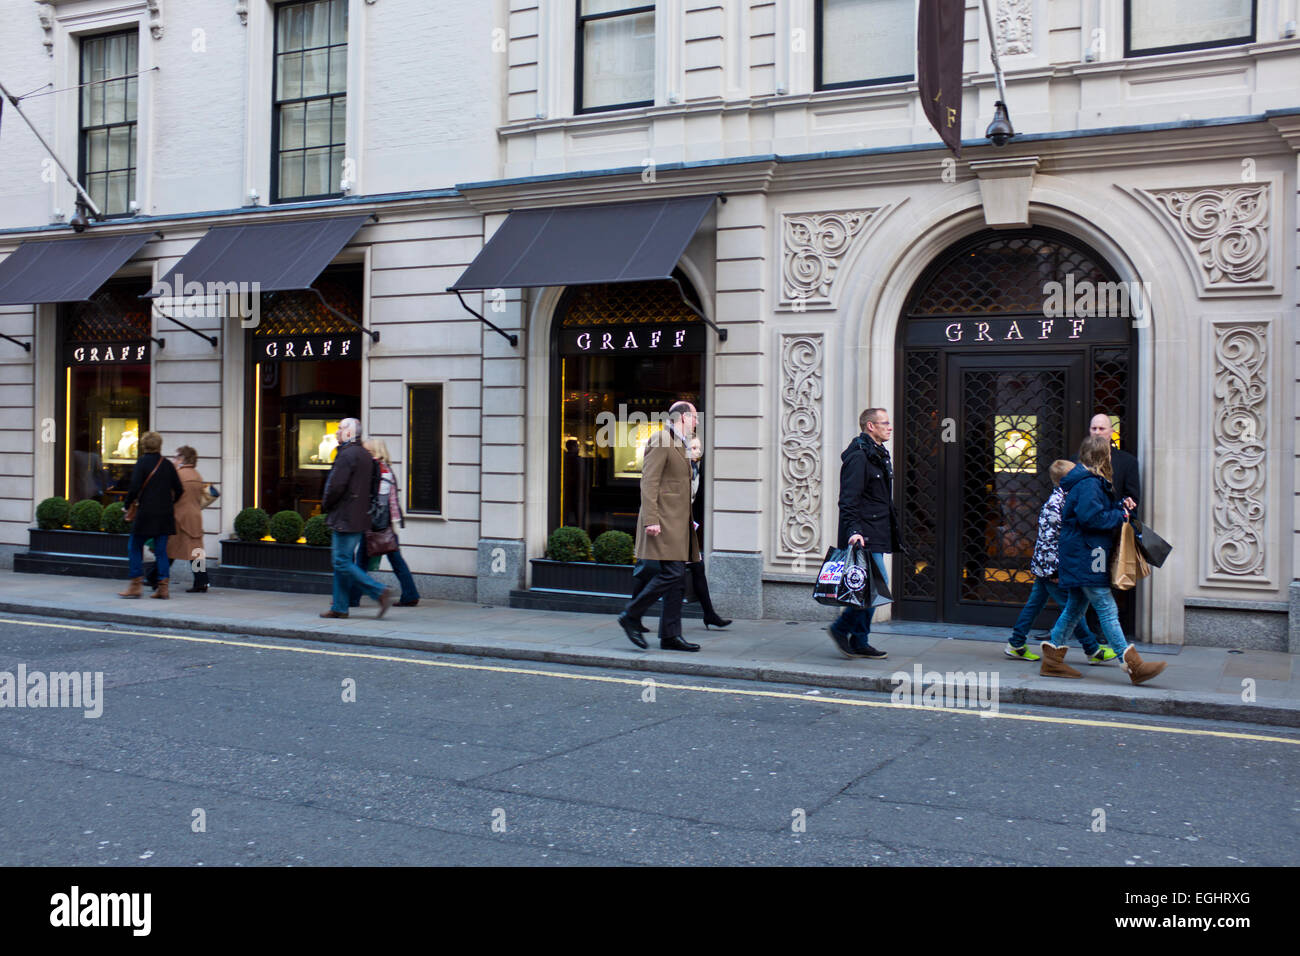 Graff Diamond Jewelry Shop,one of the oldest shops in Bond Street serving  famous customers throughout decades,Mayfair,London Stock Photo - Alamy